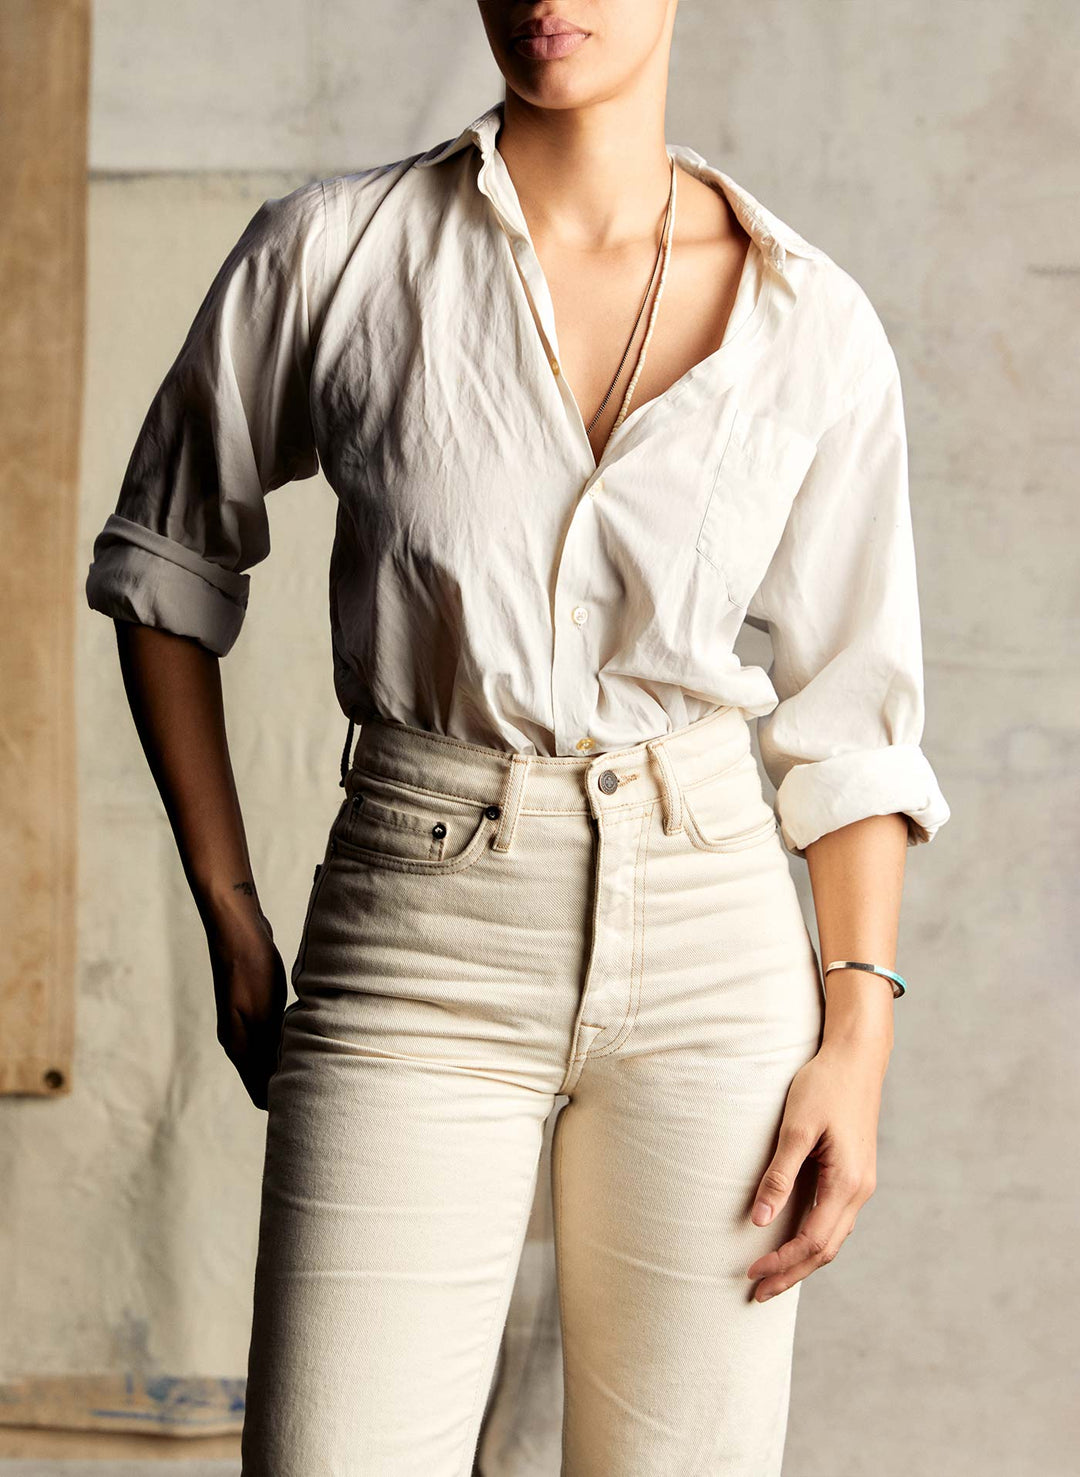 a woman in white shirt and white pants